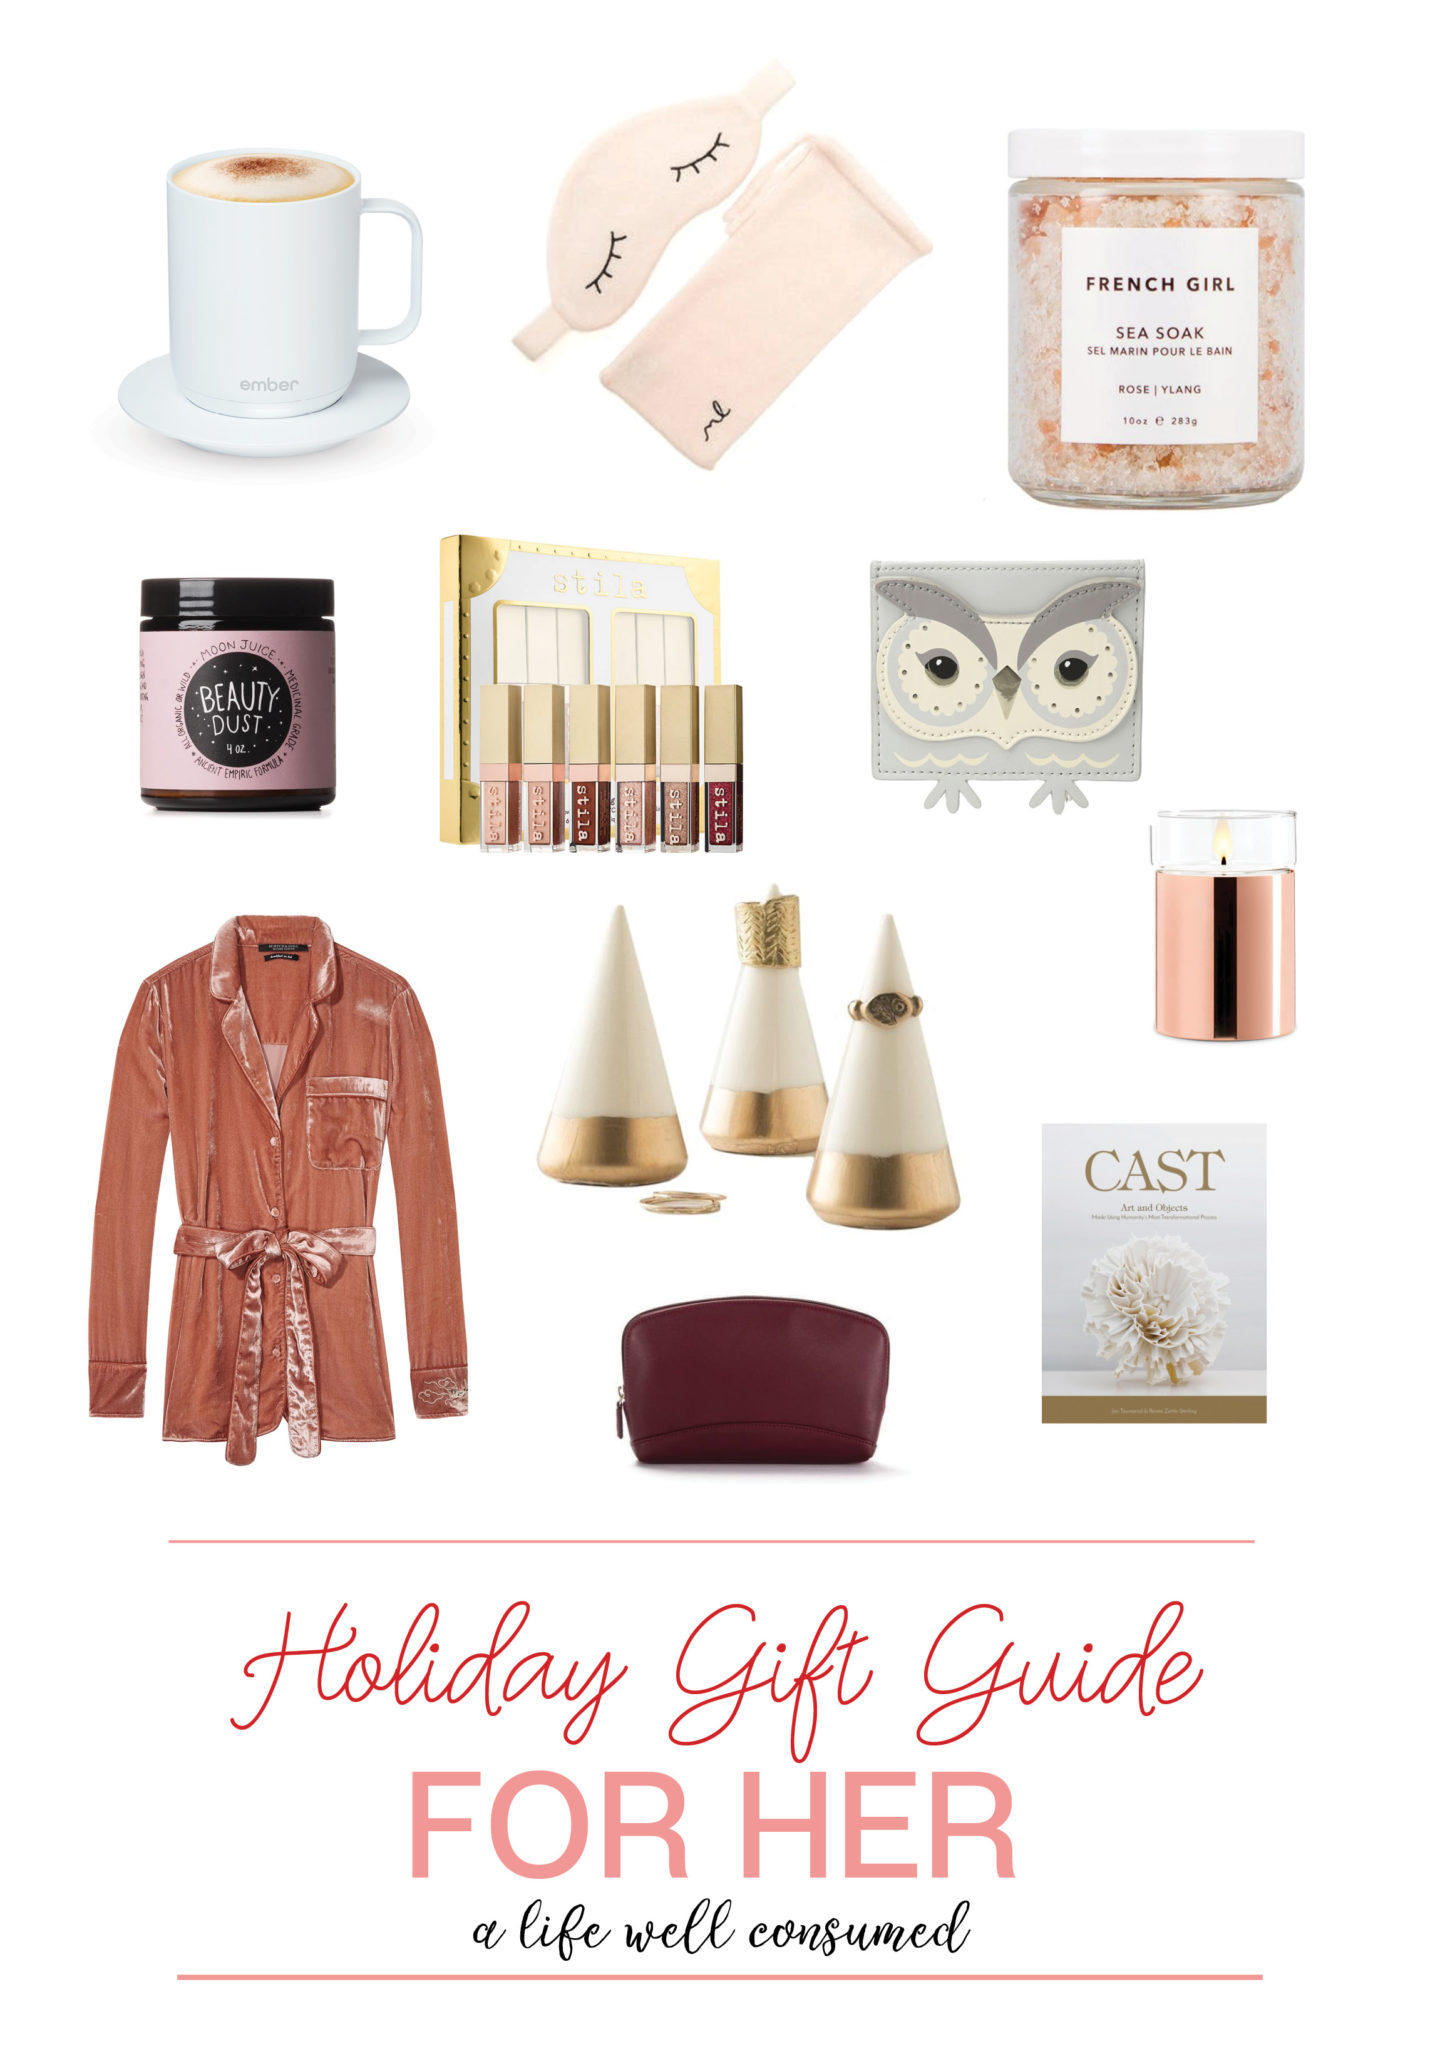 Gift Guide for Her - 2017 Holiday Gift Guide for Women